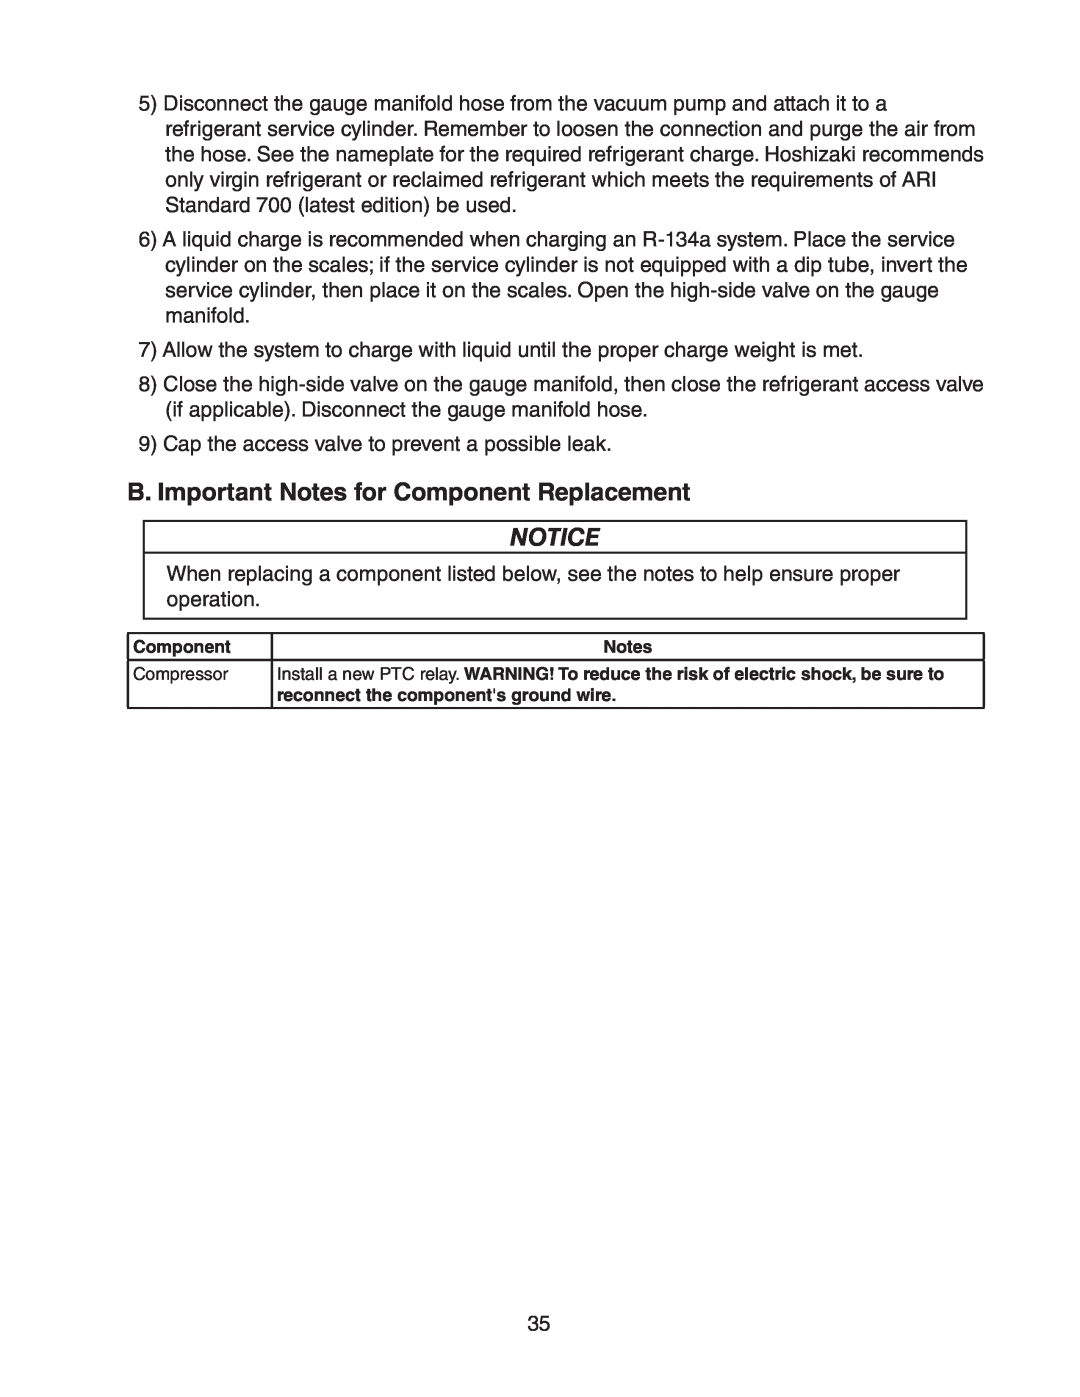 Hoshizaki HR24A service manual B.Important Notes for Component Replacement 